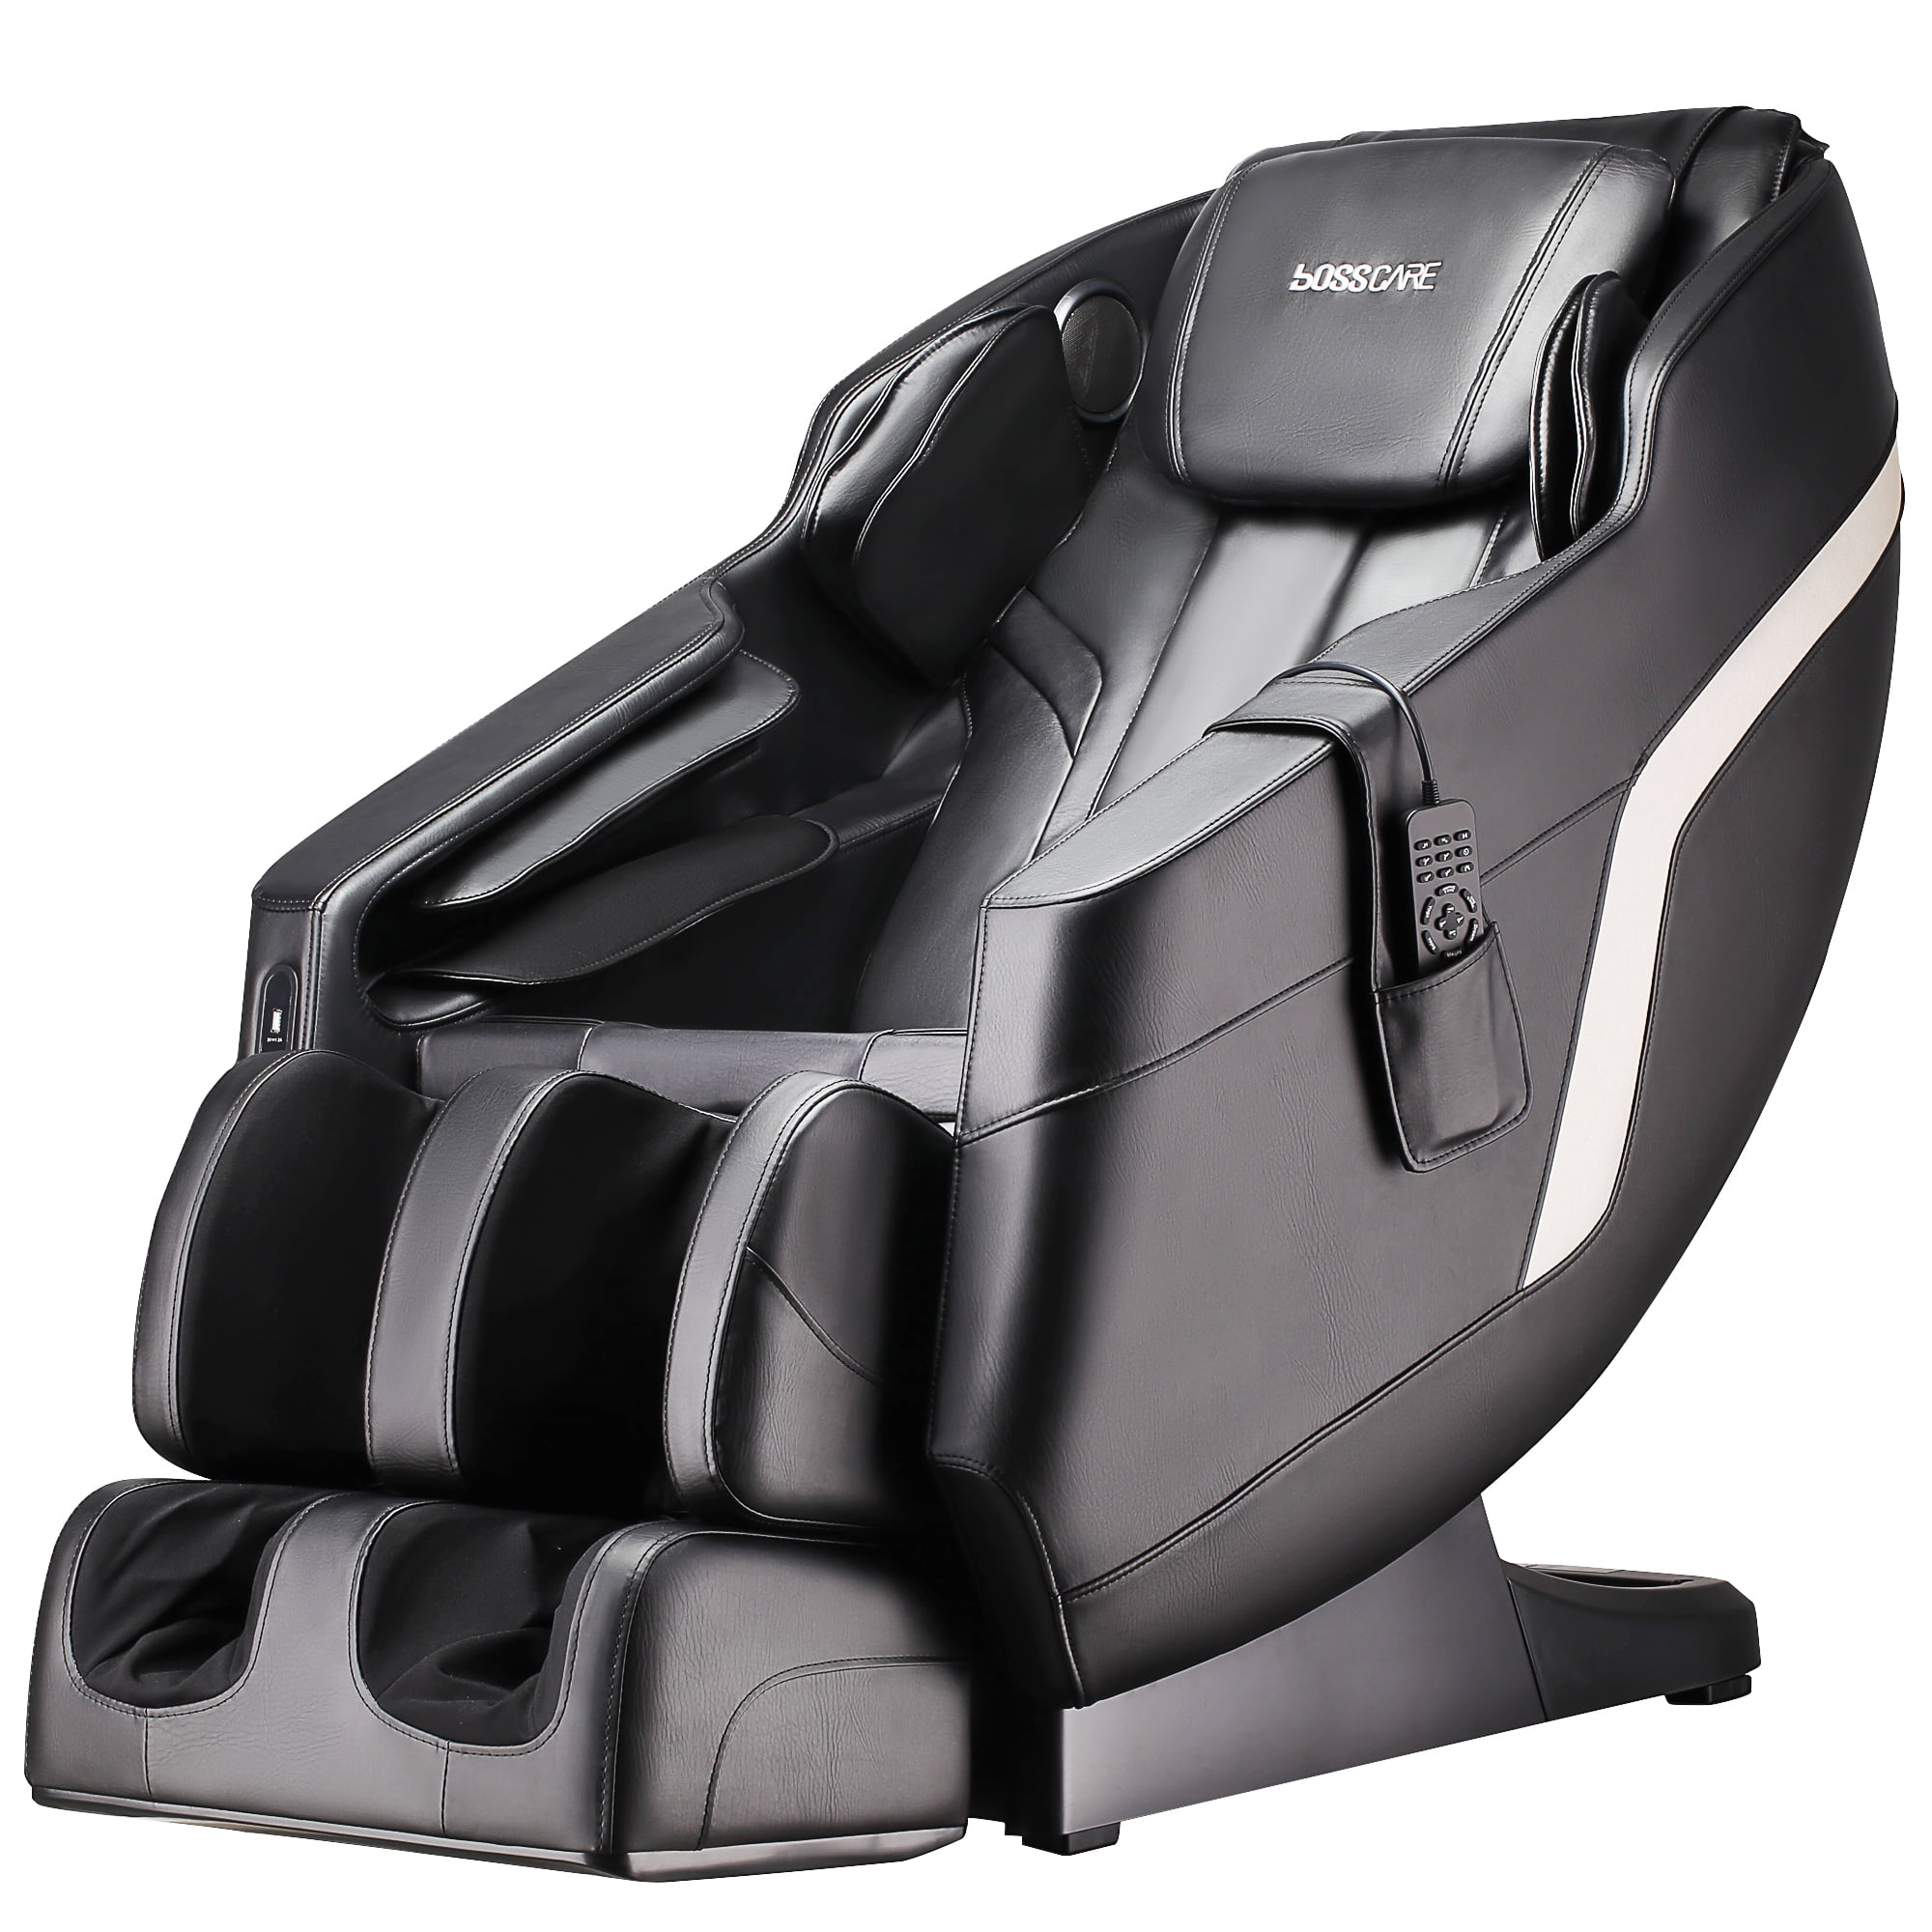 BOSSCARE Assembled Massage Chair Recliner with Zero Gravity Full Body Massage with USB Charge Port Black